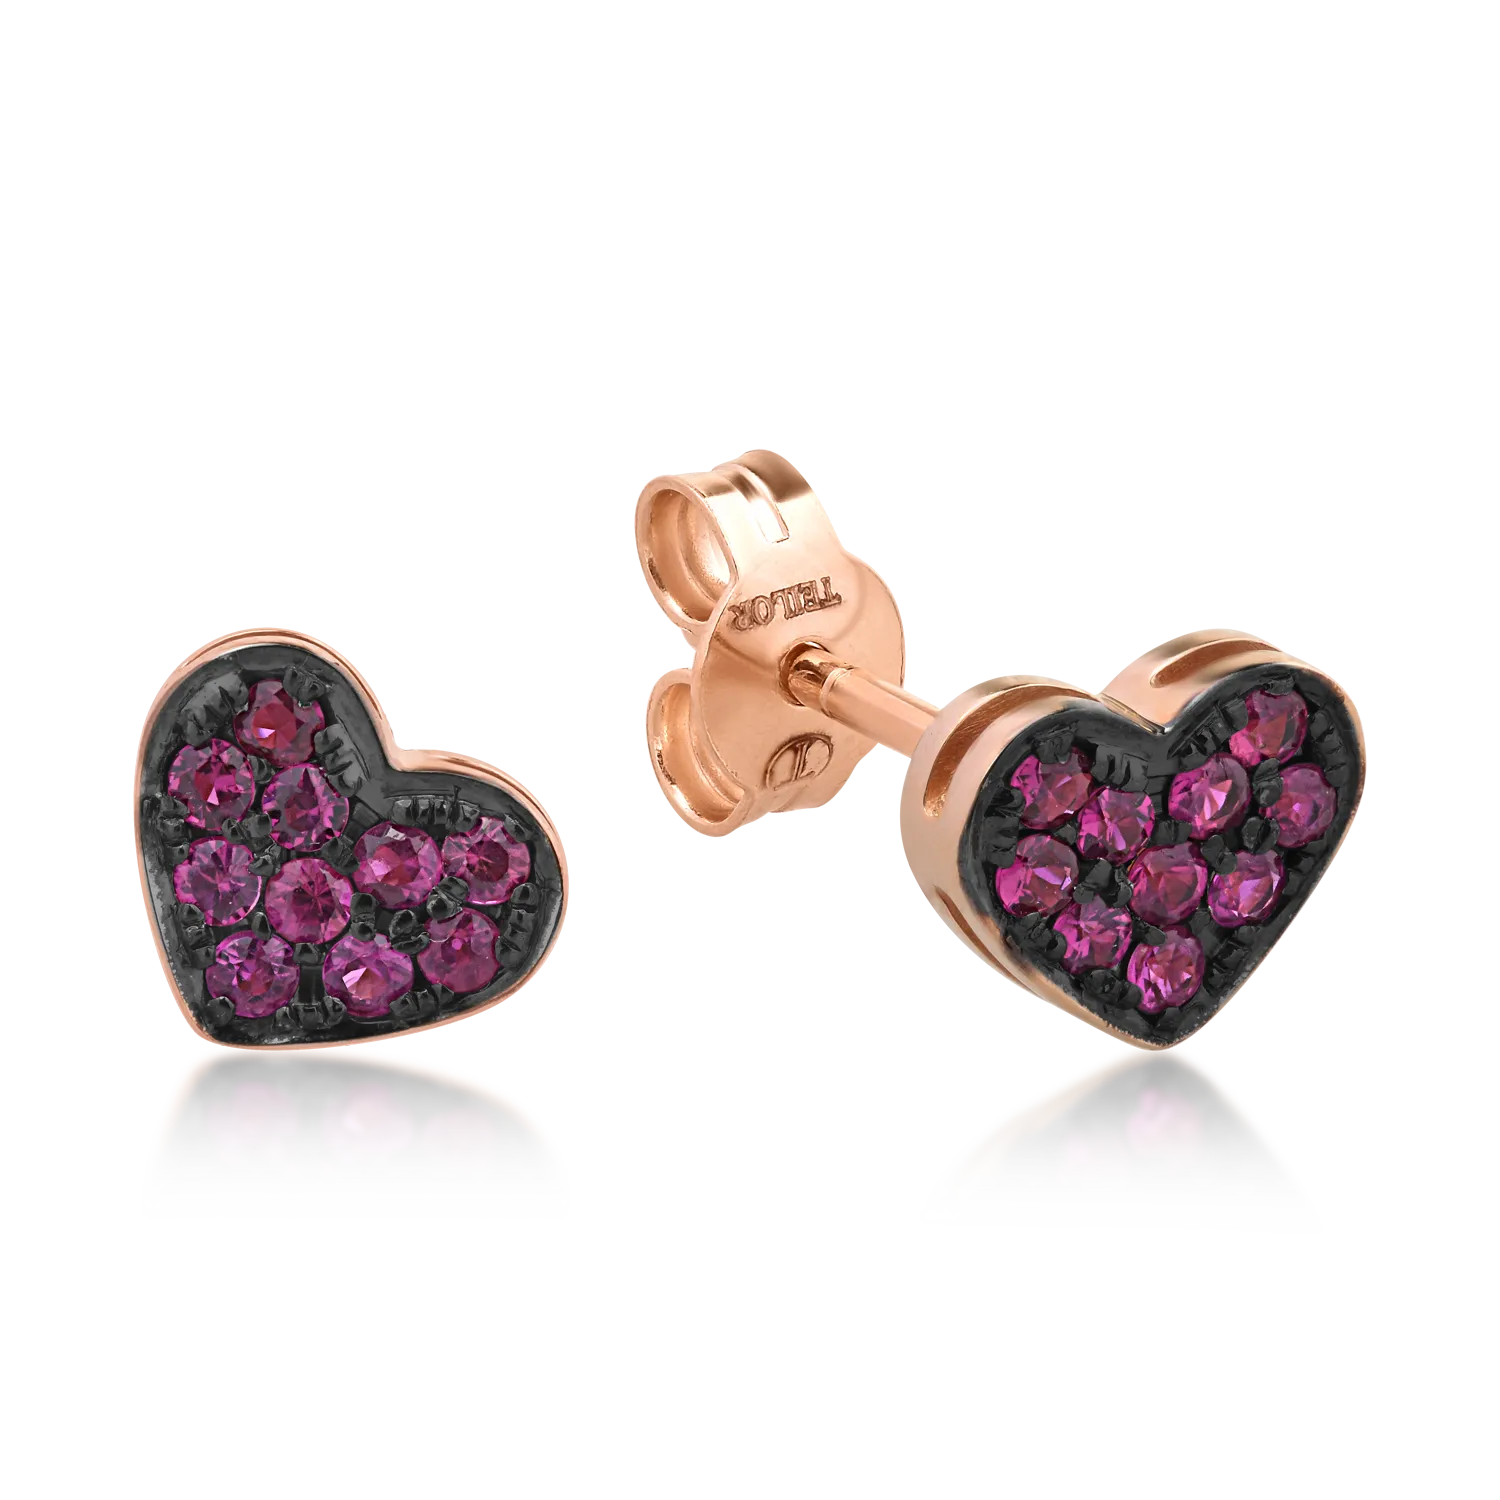 18K rose gold heart earrings with 0.24ct rubies